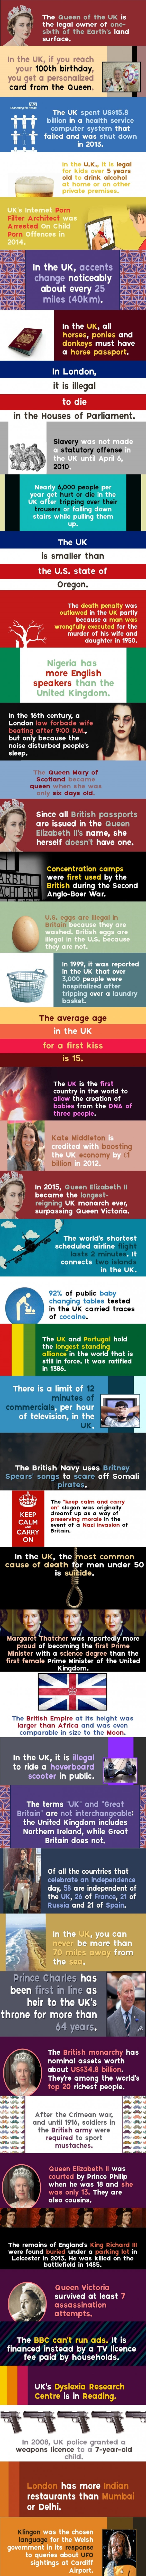 Fun facts about the UK